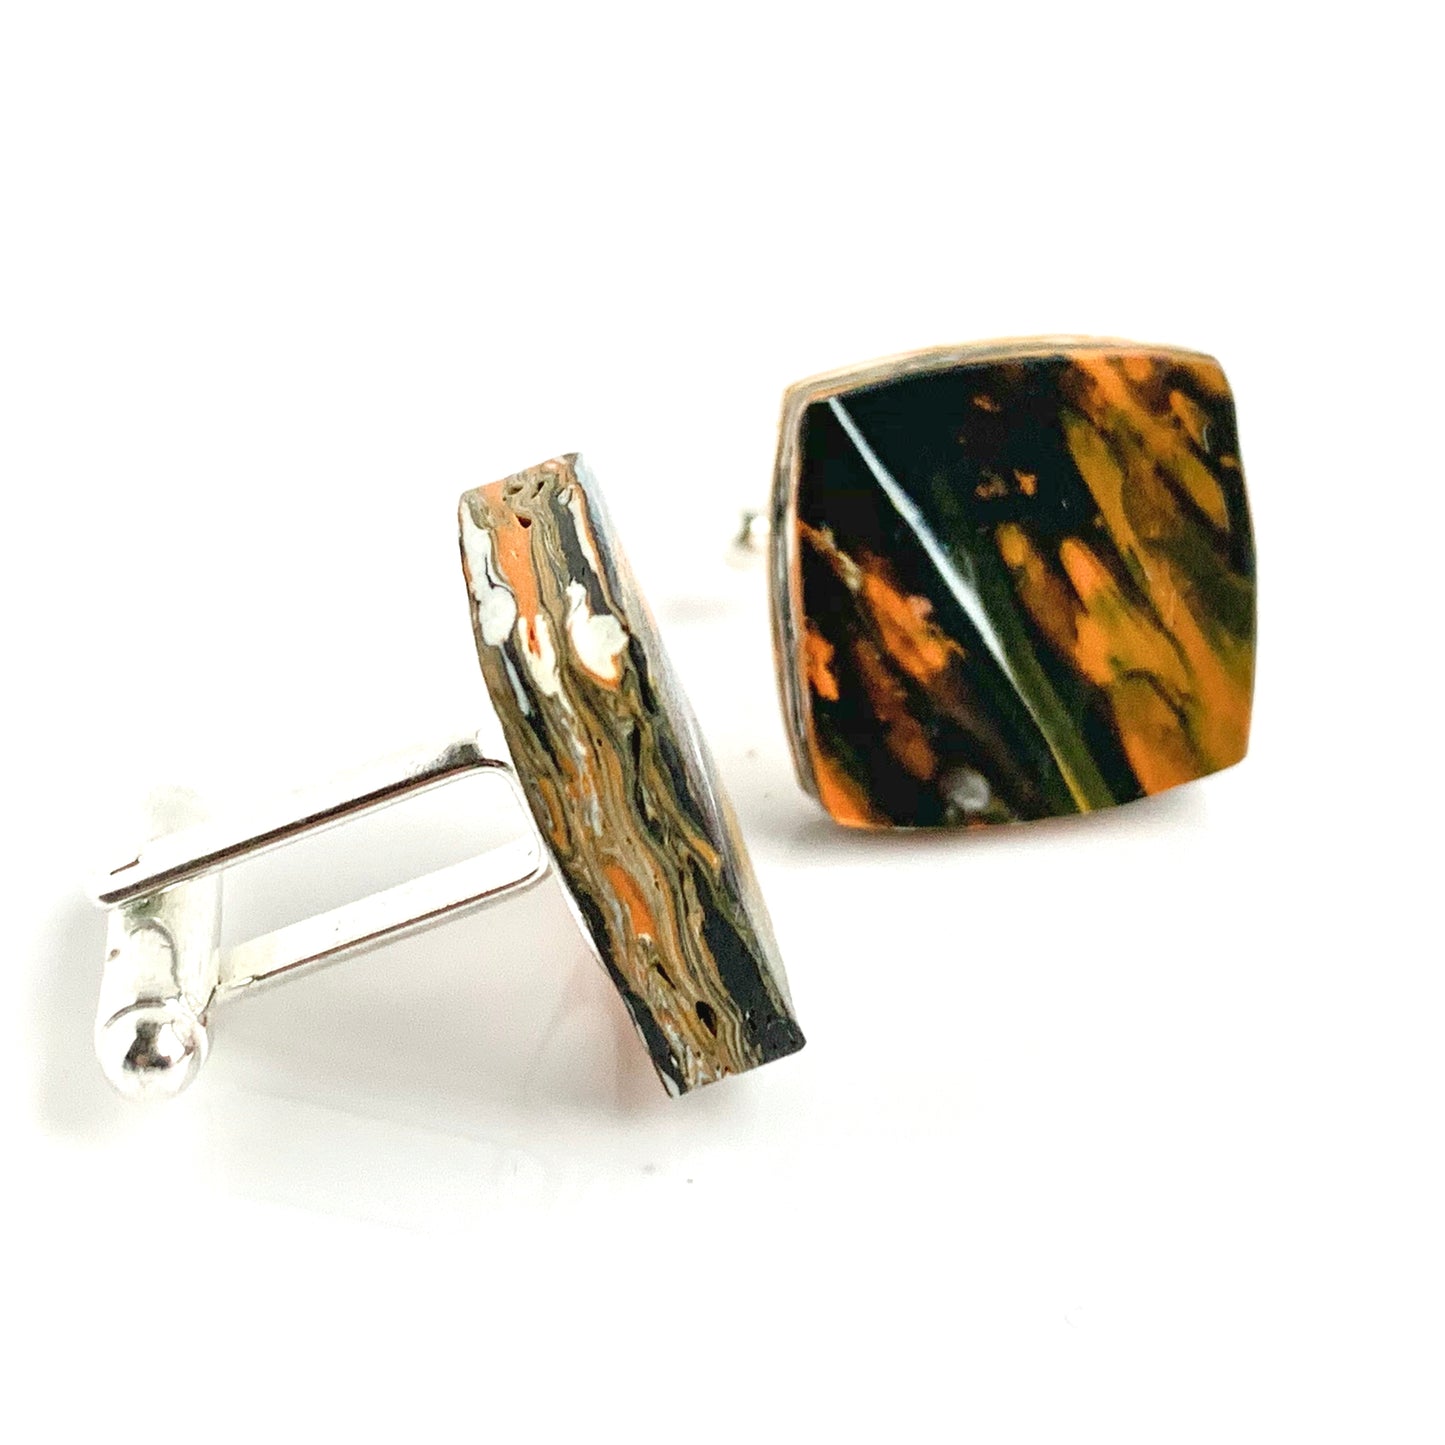 Unique Handmade Recycled Plastic Square Orange Cufflinks with brass findings